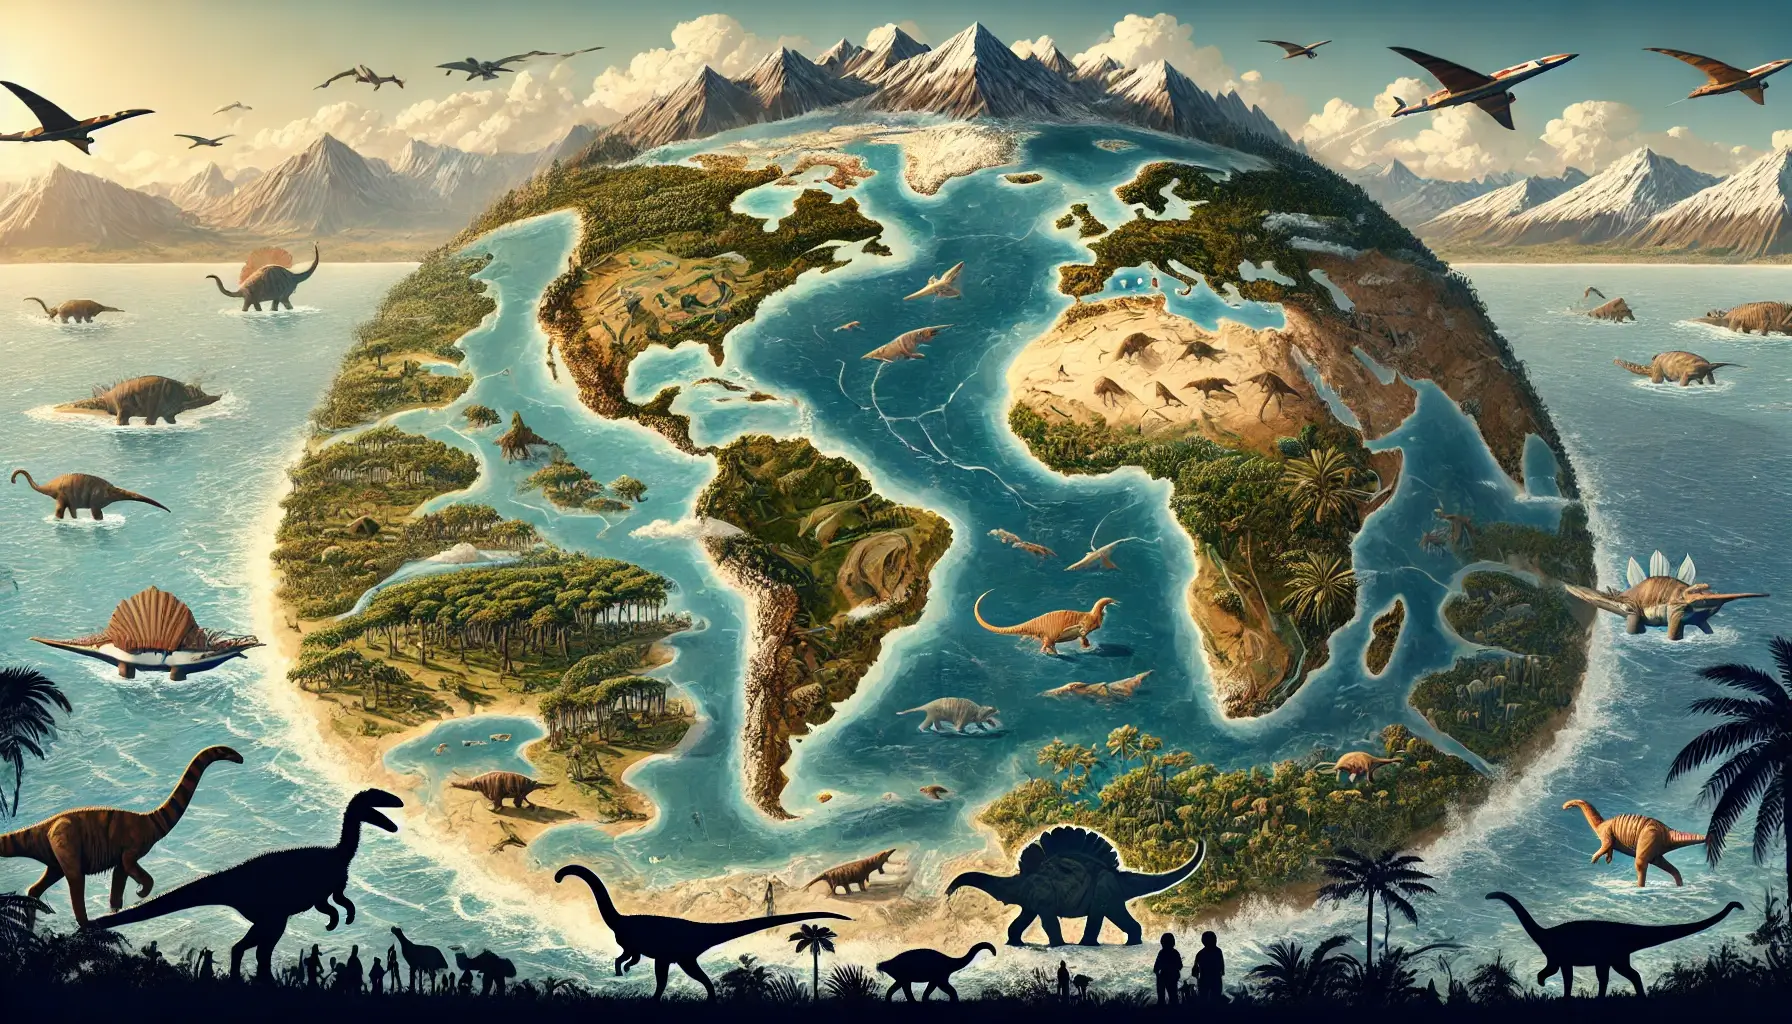 Illustration of Triassic Pangaea showing diverse climate zones and prehistoric life